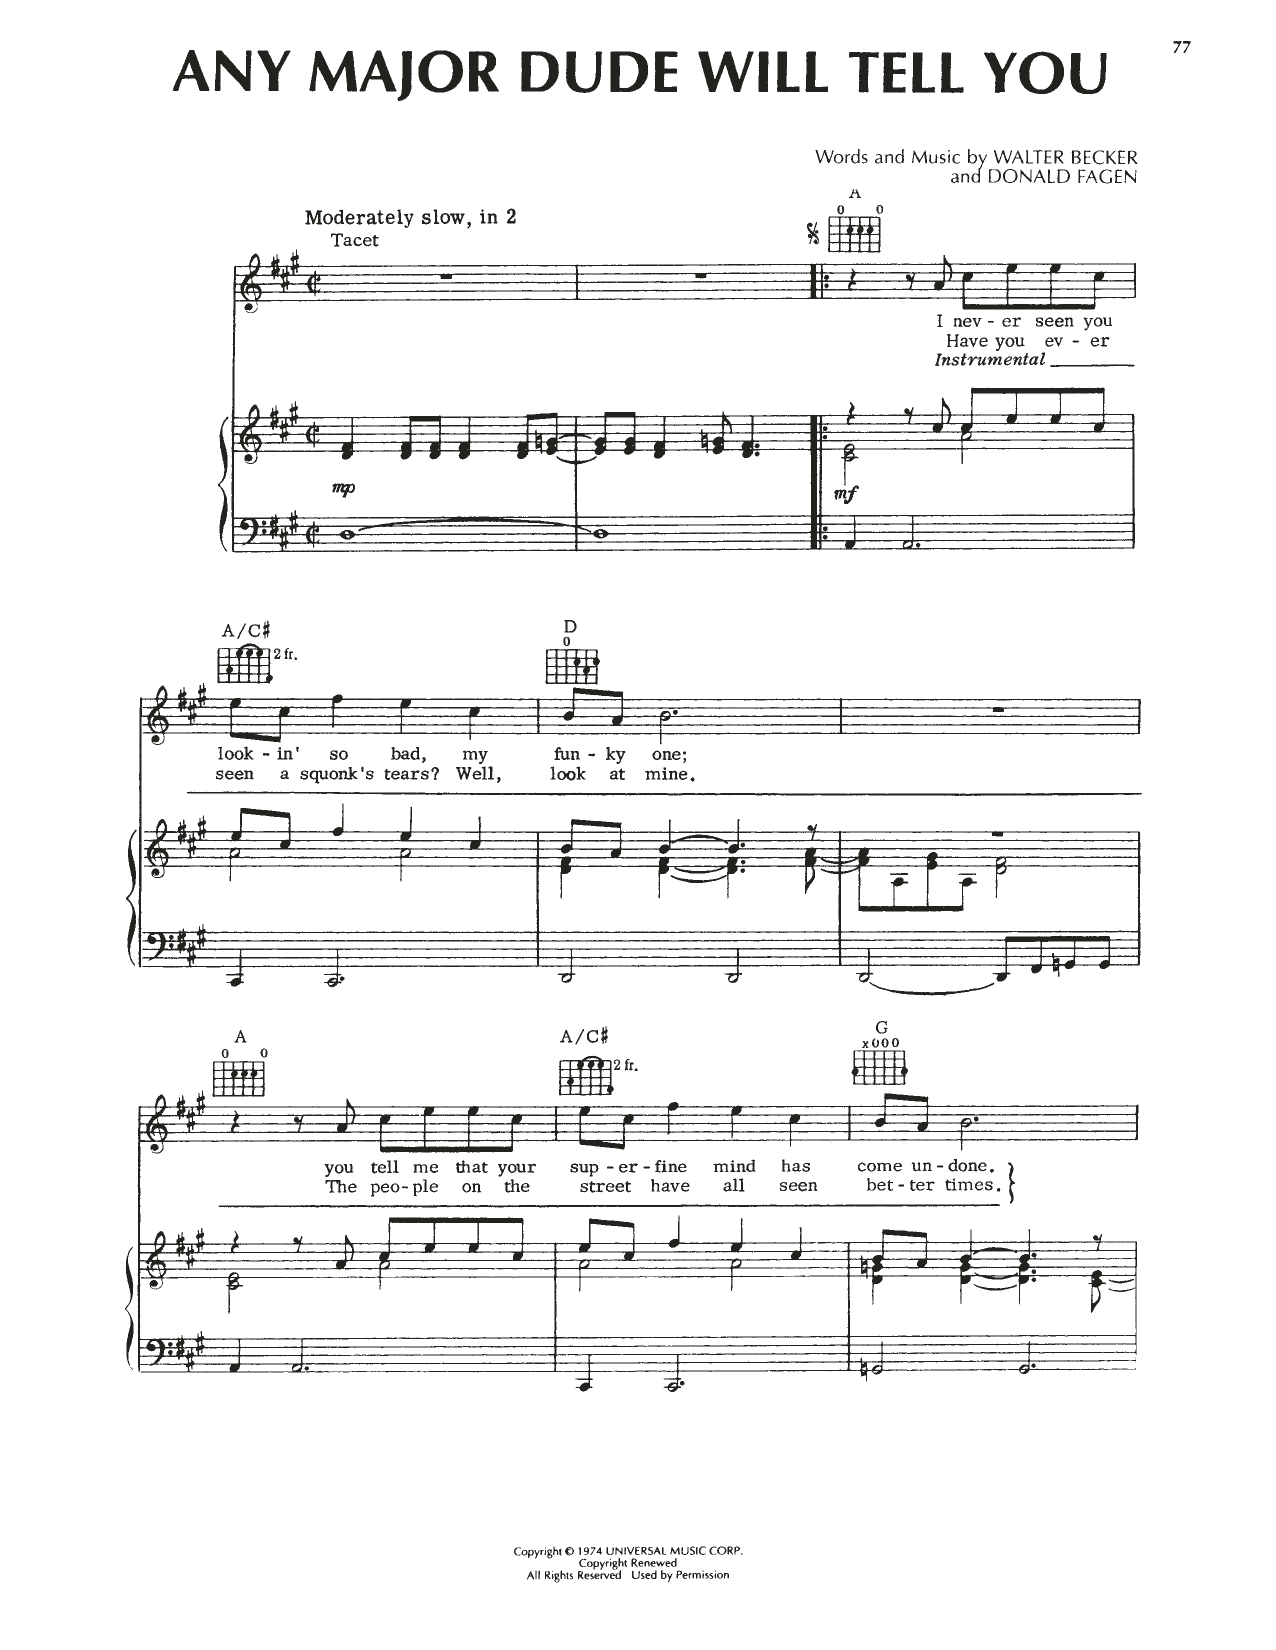 Download Steely Dan Any Major Dude Will Tell You Sheet Music